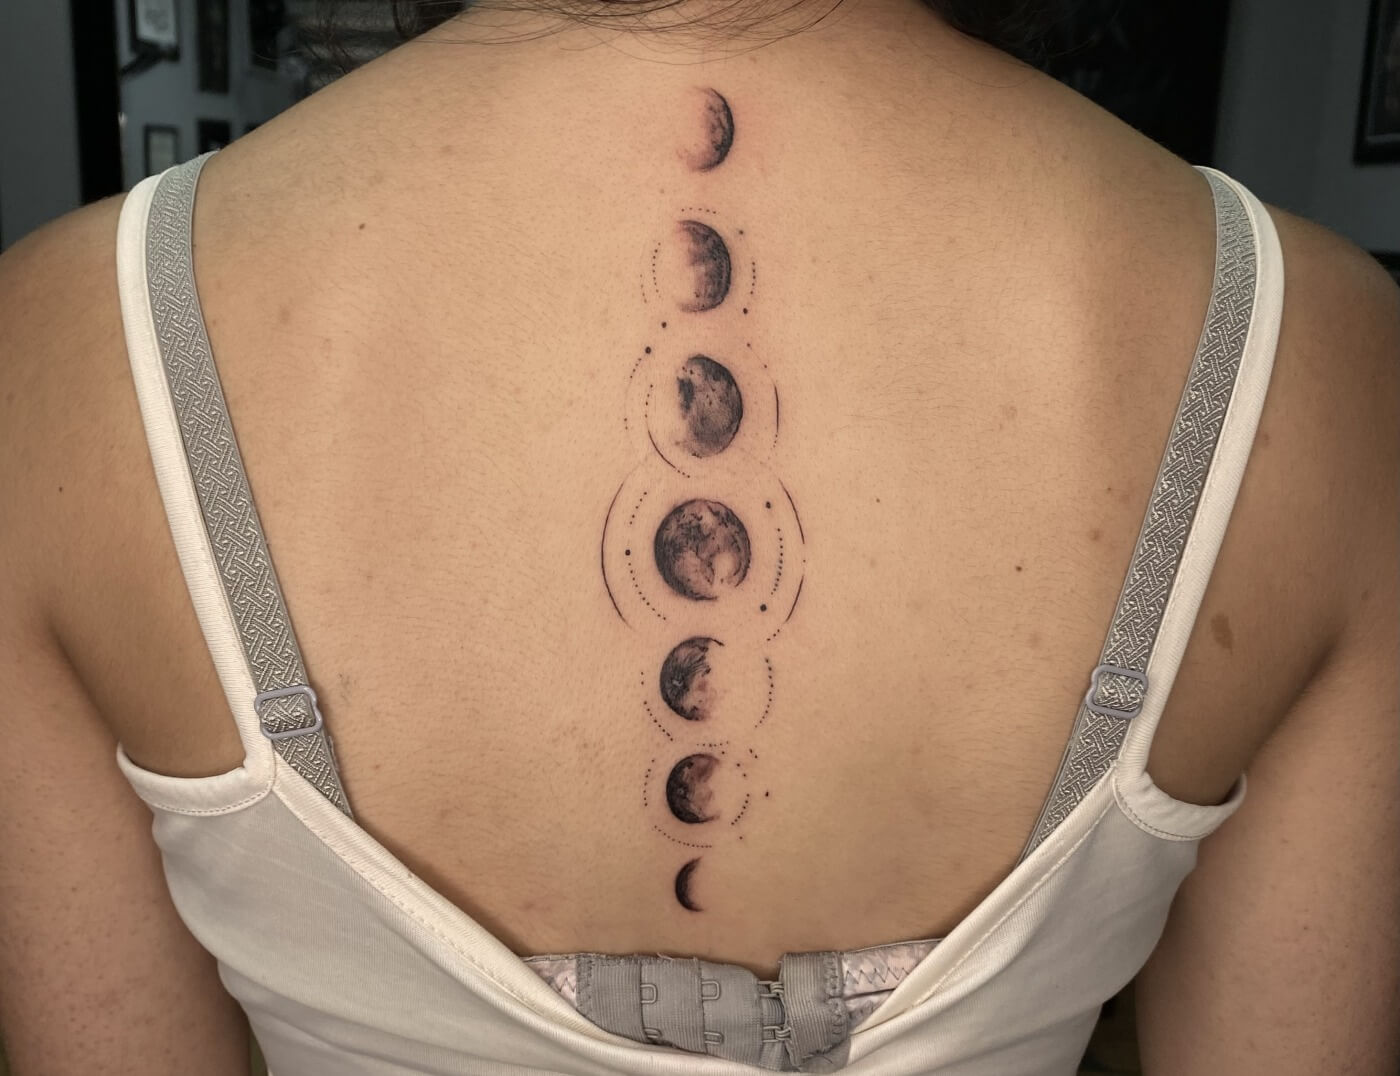 'Moon Phases' Black & Grey Tattoo by Rene Cristobal, A guest Artist At Iron Palm Tattoos. Rene comes to Atlanta from Vision Tattoo Studio in Concepcion, Chile. The moon is a symbol of change, cycles, and transformation. The continuous transformation from new moon to full moon and back again represents the continuous cycles of life. People get moon phase tattoos as reminder of the ever-changing nature of existence. We're open until 2AM most nights. Call 404-973-7828 or stop by for a free consultation. Walk ins are welcome.